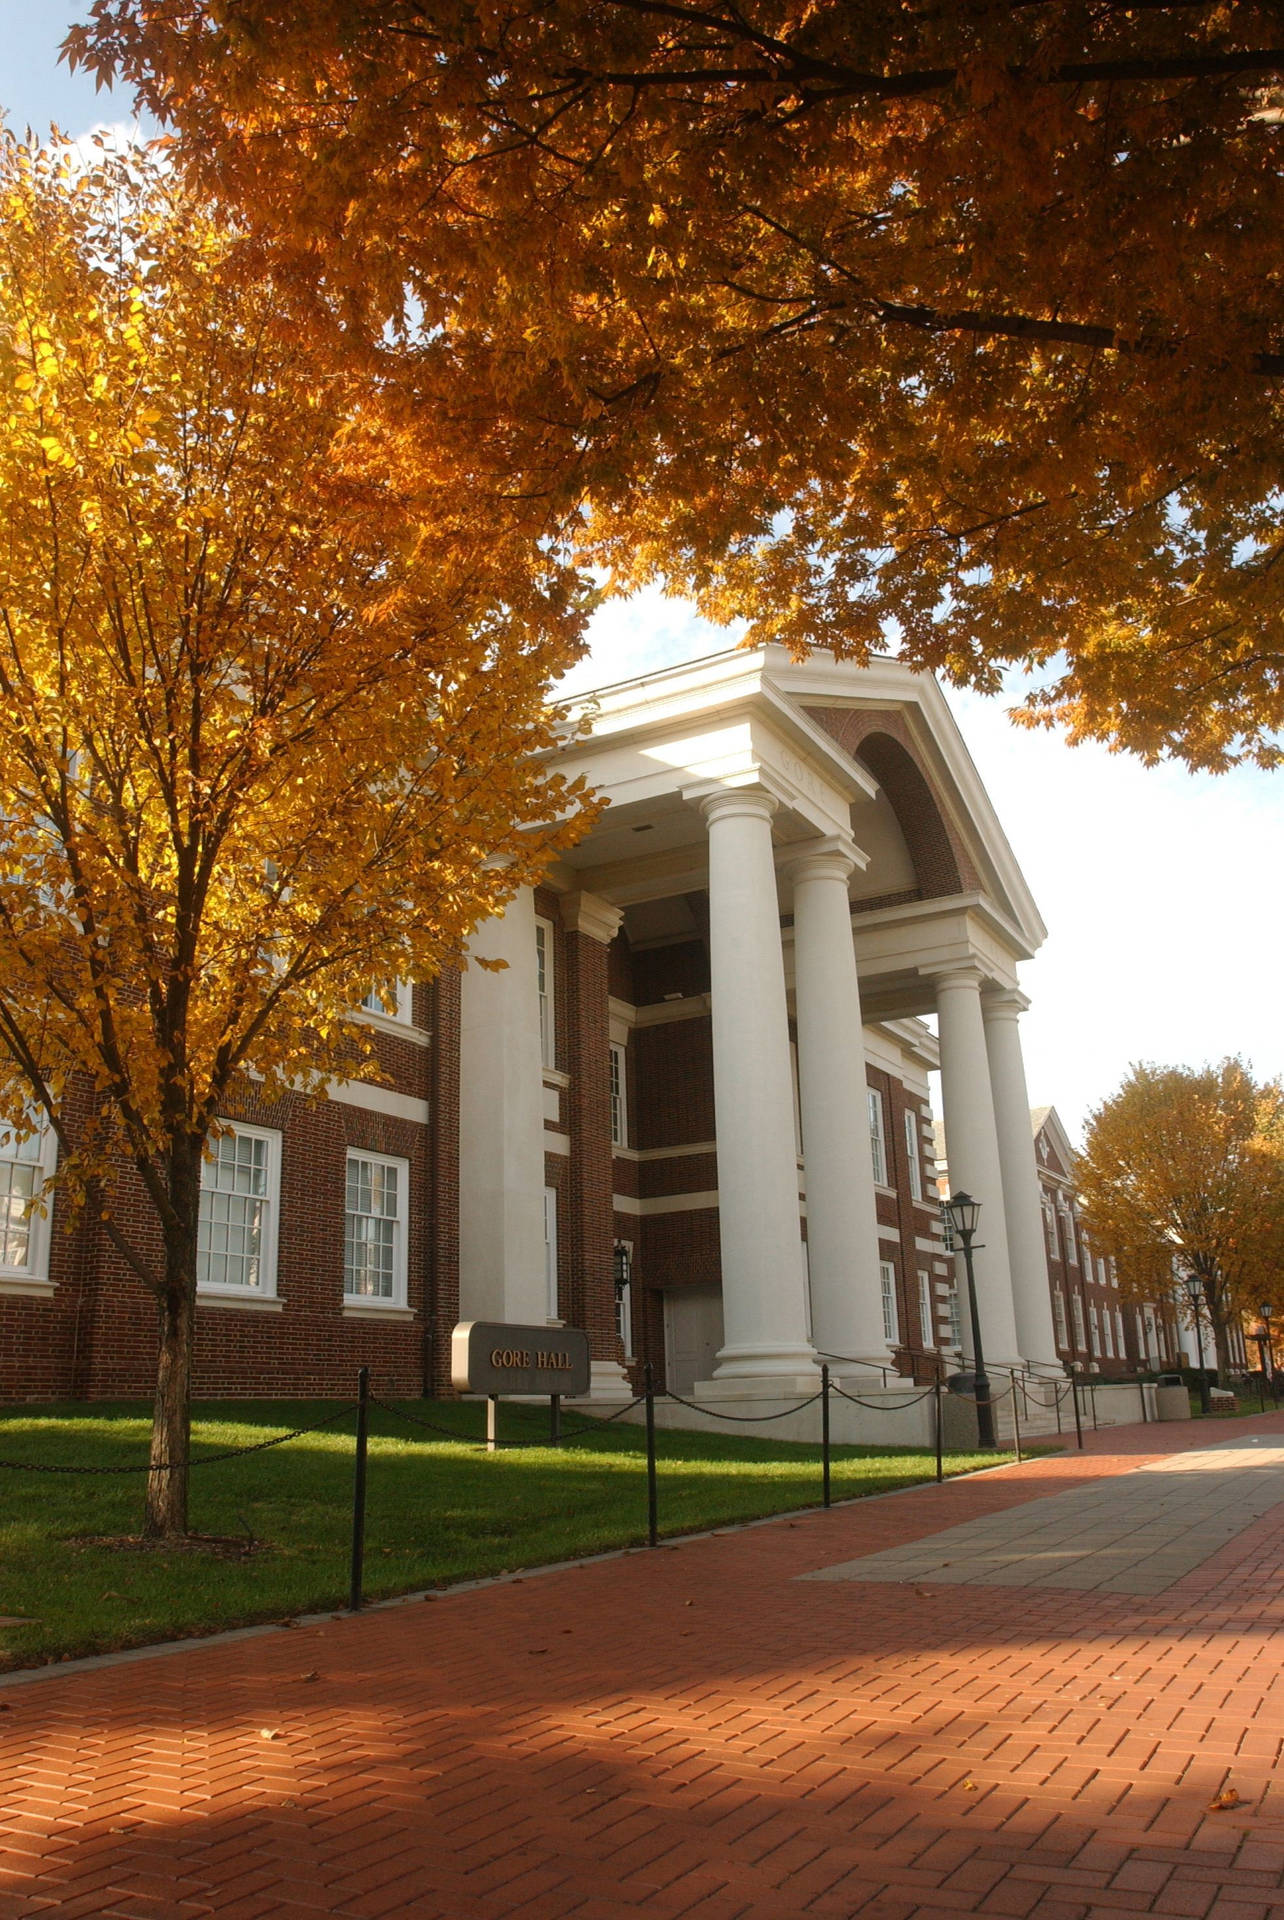 Majestic Architecture of University of Delaware Campus Building Wallpaper